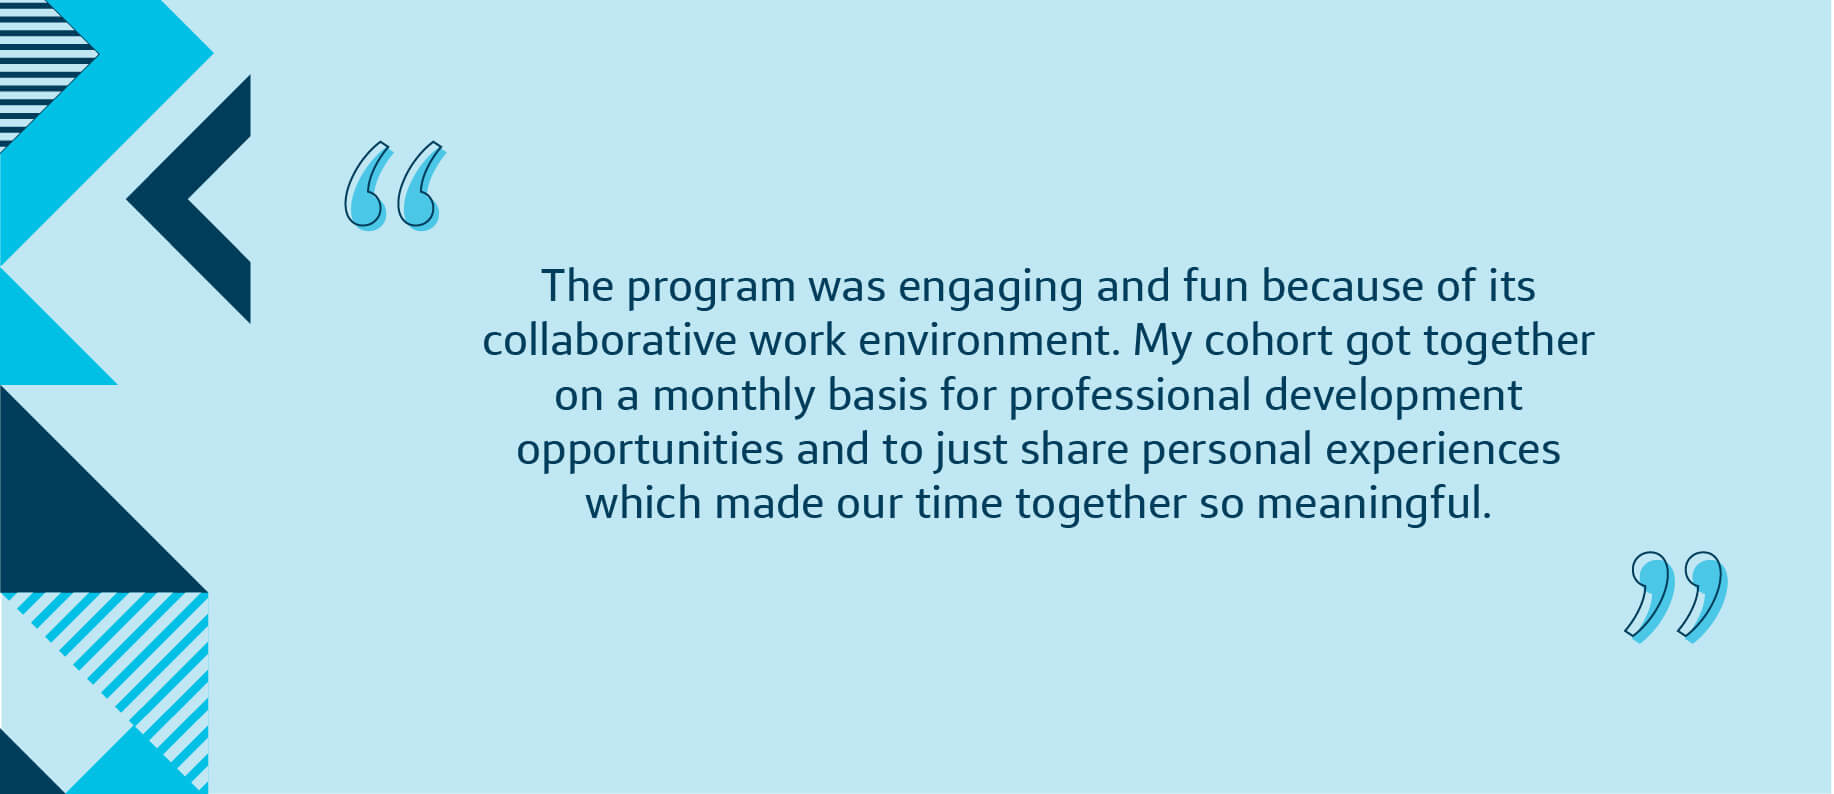 The program remains engaging and fun even in a remote work environment. My cohort got together on a monthly basis for professional development opportunities and to just share personal experiences which made the distance feel less prominent.